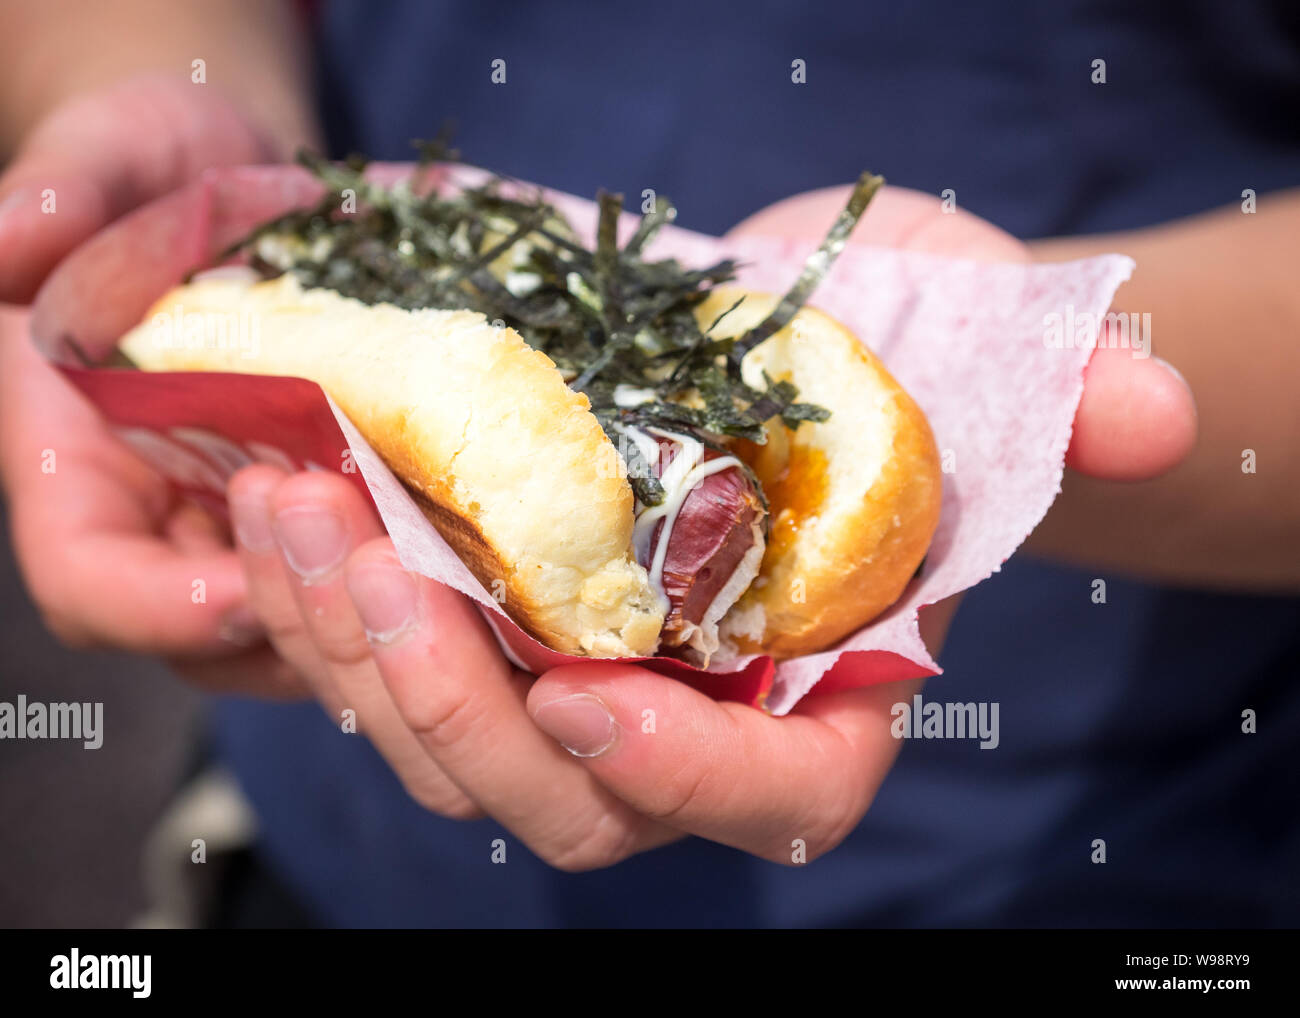 A terimayo JAPADOG, the signature hot dog of JAPADOG, a popular small chain of hot dog stands based in Vancouver, British Columbia, Canada. Stock Photo